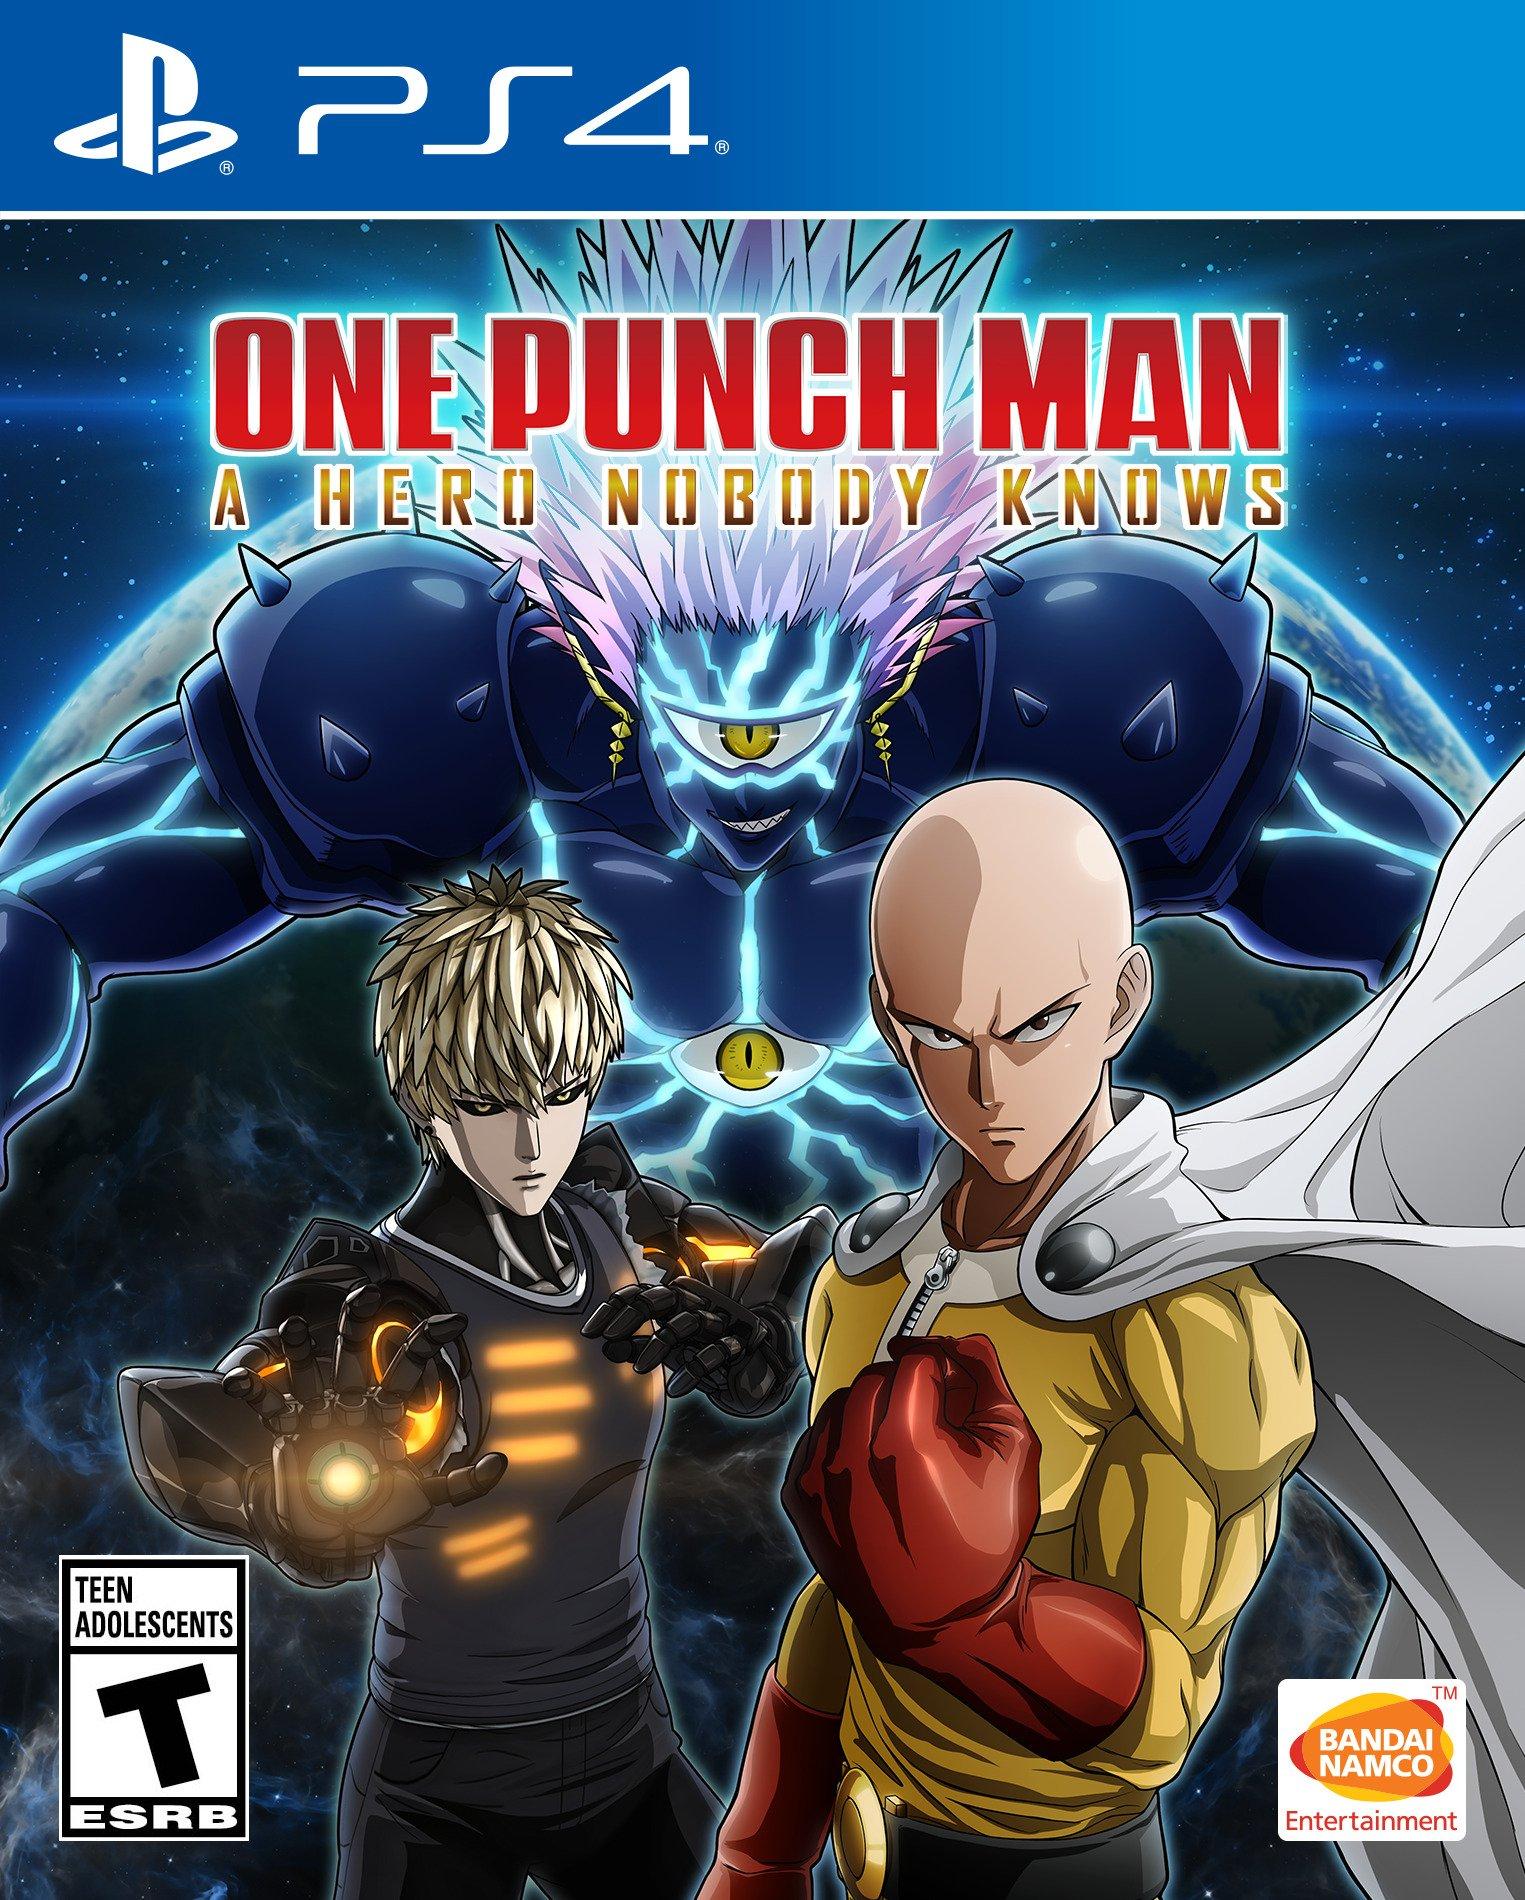 ONE-PUNCH MAN VOL 25  UNBOXING E REVIEW DO MANGÁ 